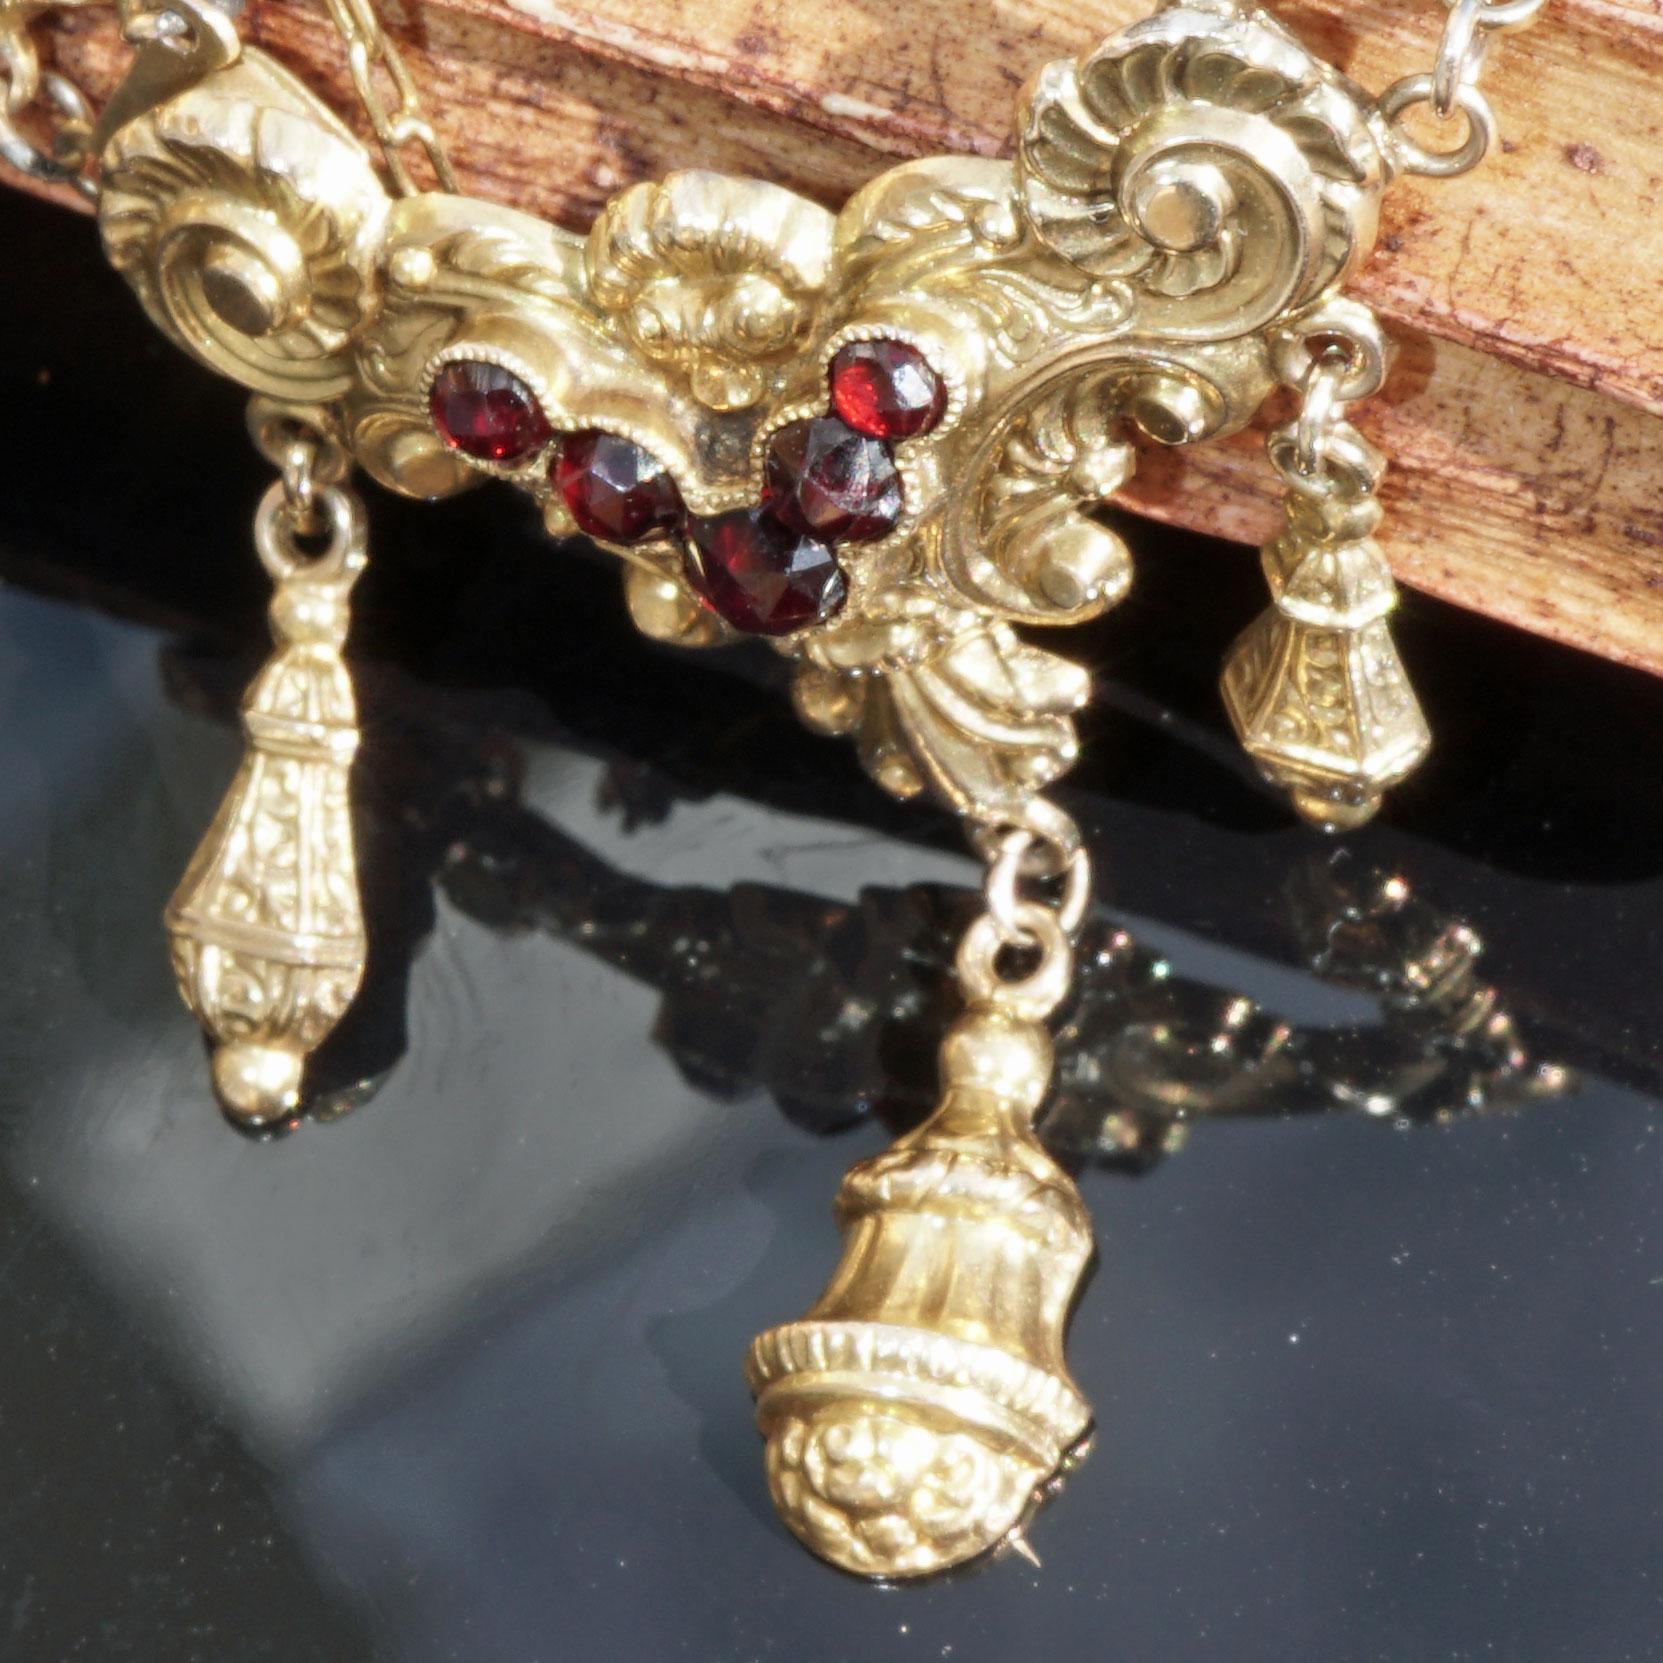 Women's or Men's Biedermeier Necklace around 1840 rolled Gold on Silver with Chain well condition